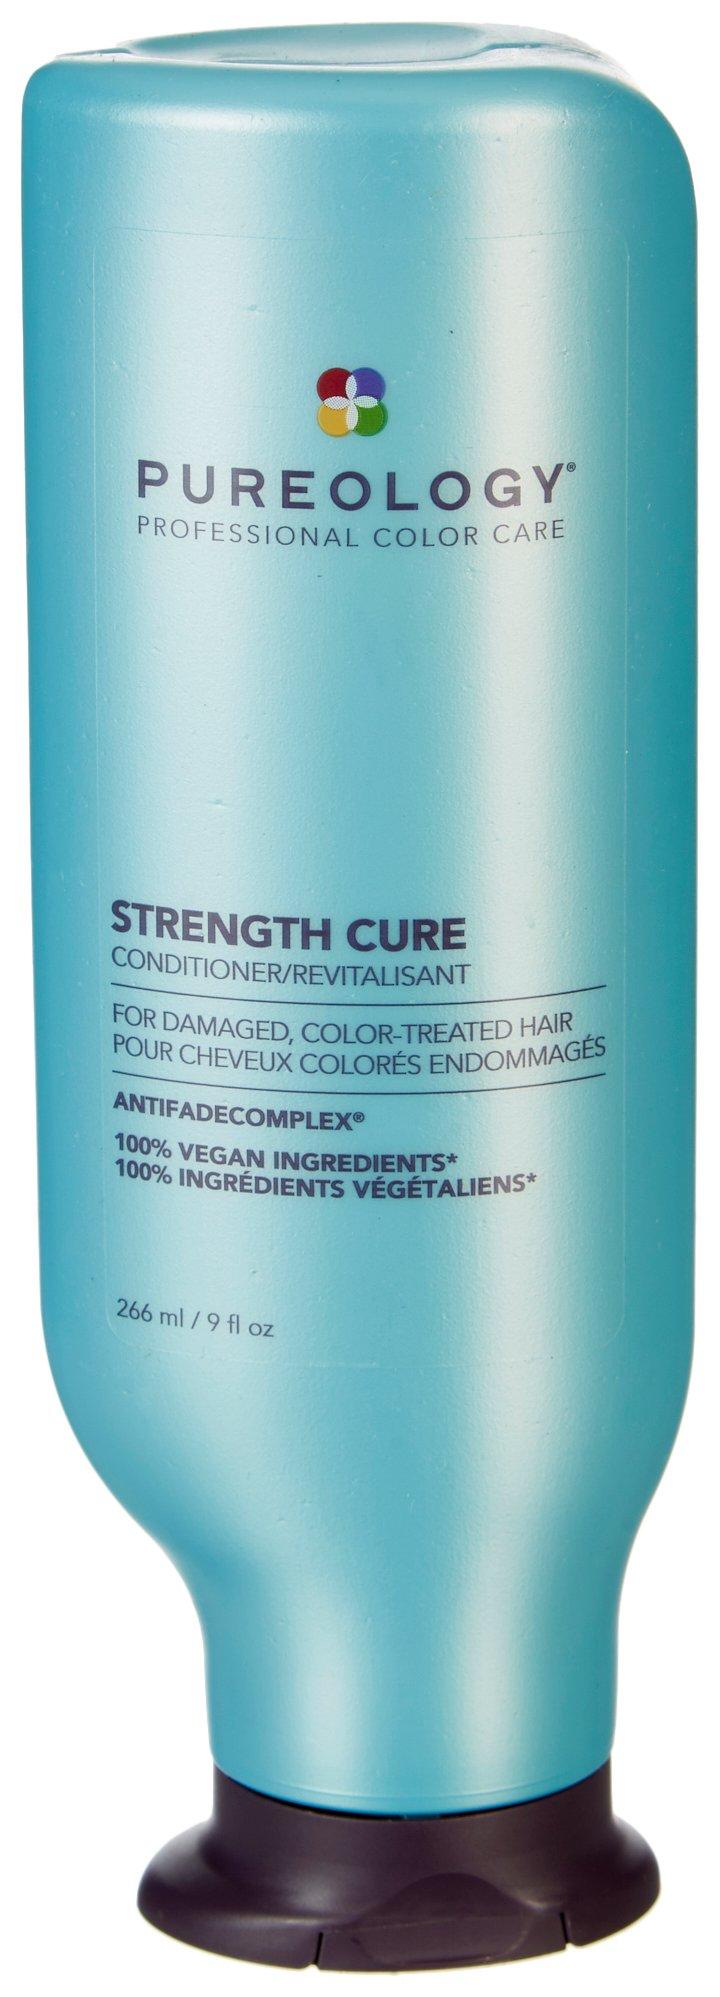 Pureology Strength Cure Conditioner For Color-Treated Hair